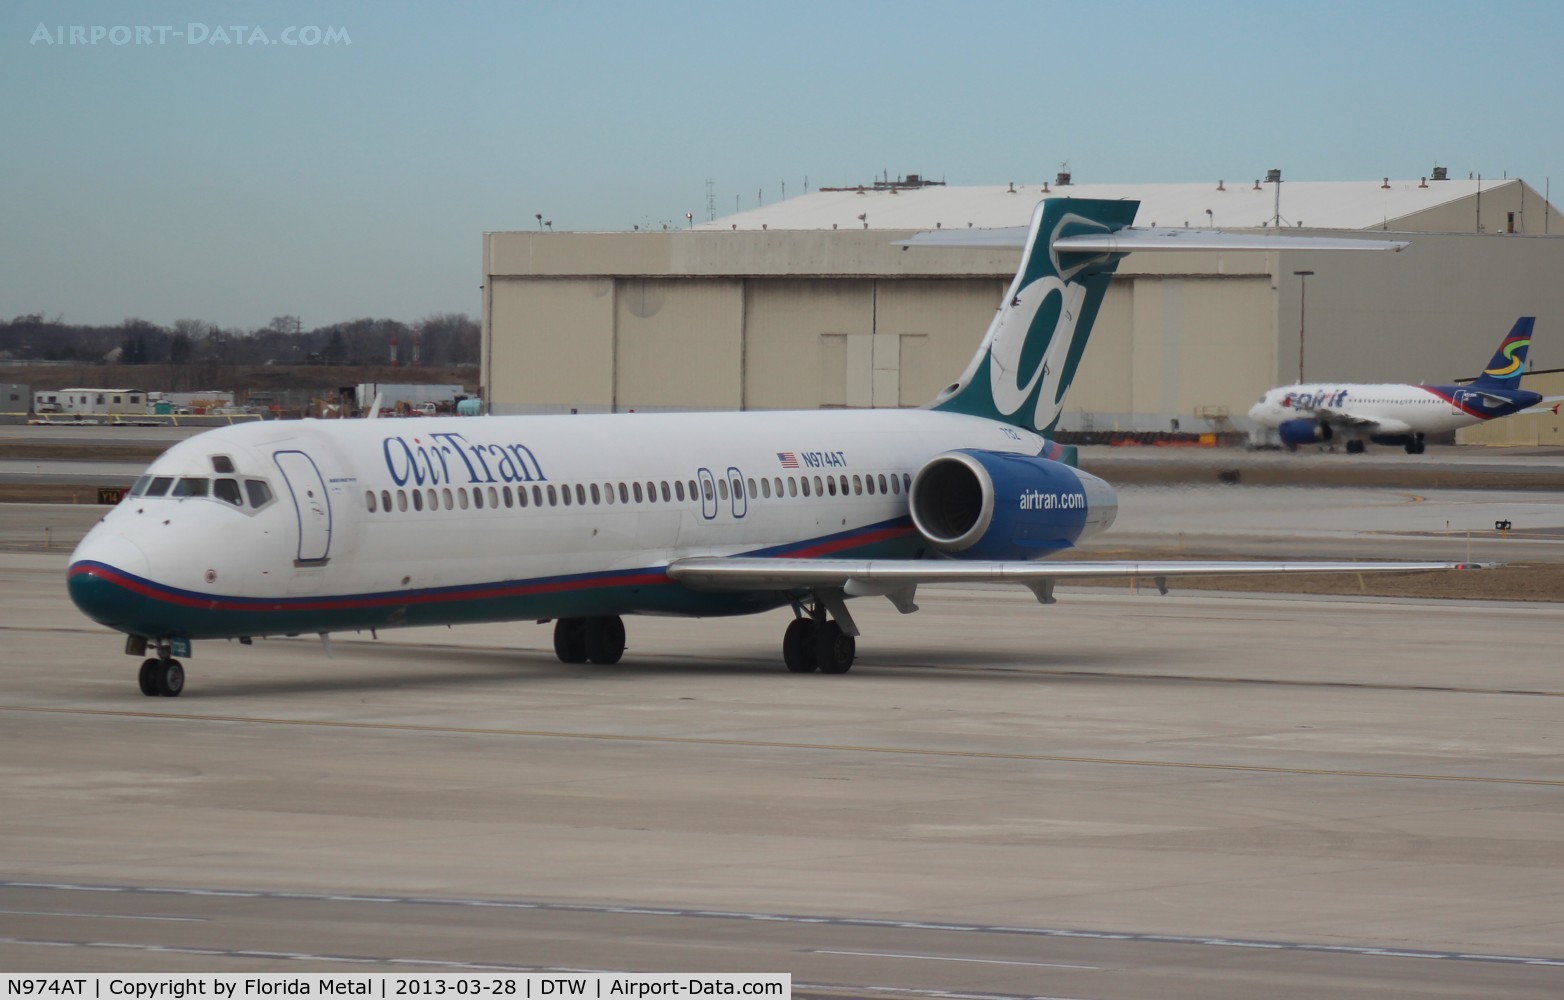 N974AT, 2002 Boeing 717-200 C/N 55034, Air Tran 717, my flight into DTW from MCO